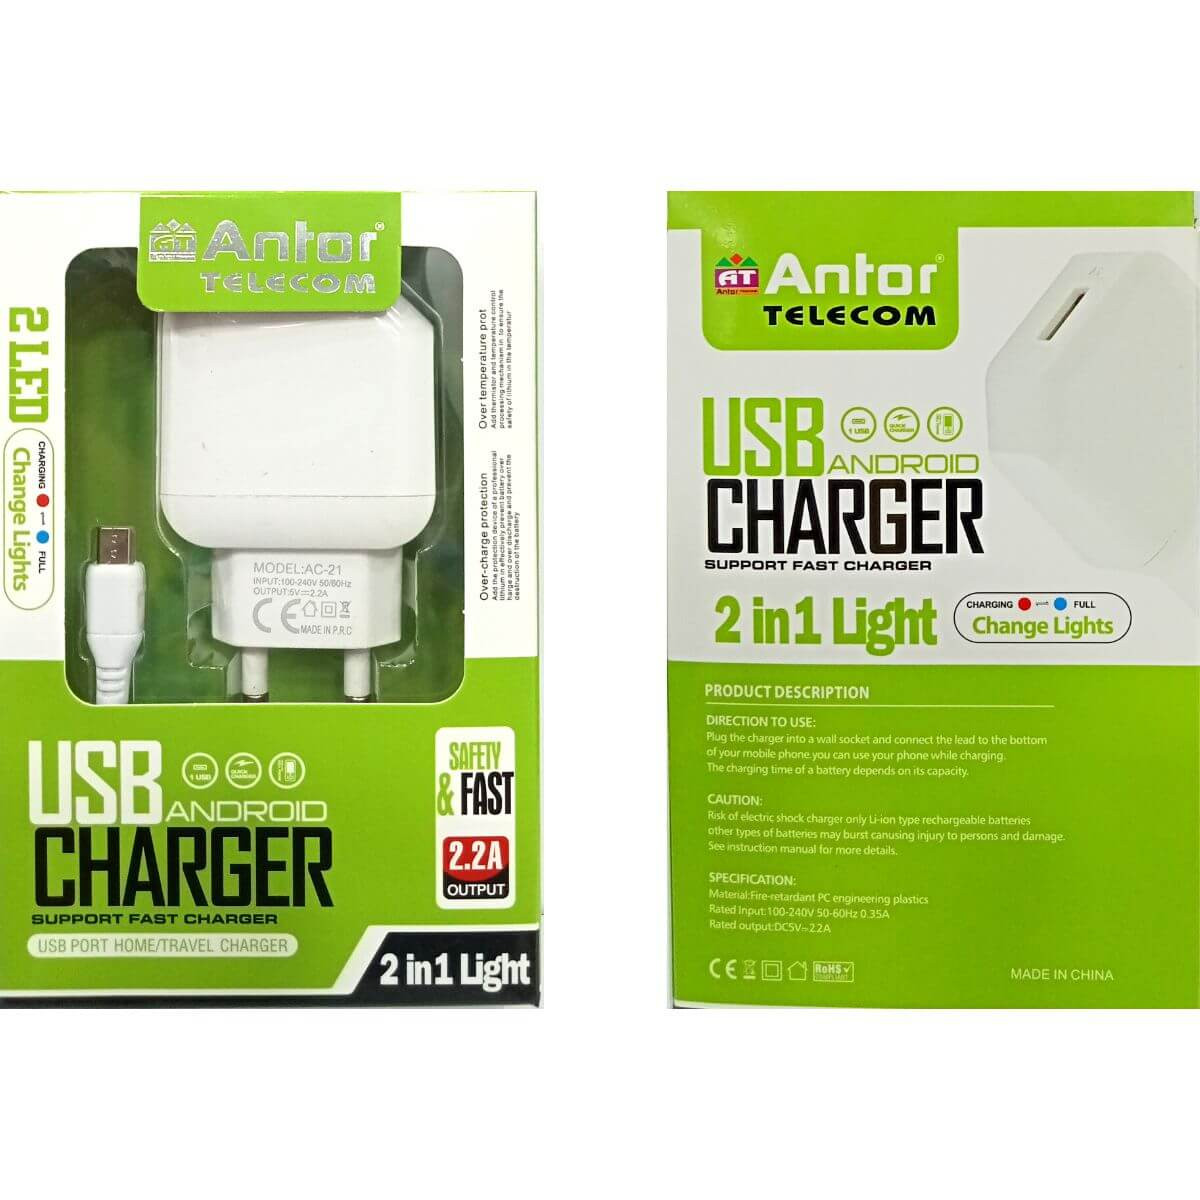 Antor 2.2A Micro USB Android ChargerBD